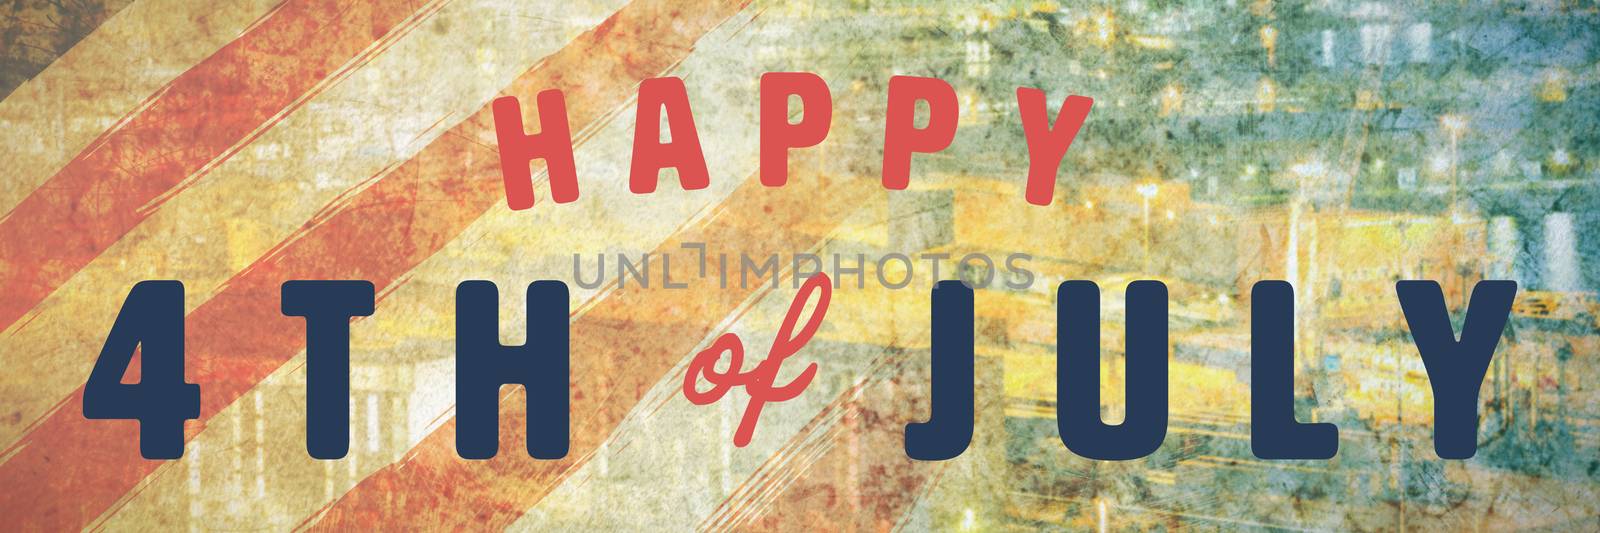 Composite image of digitally generated image of happy 4th of july text by Wavebreakmedia